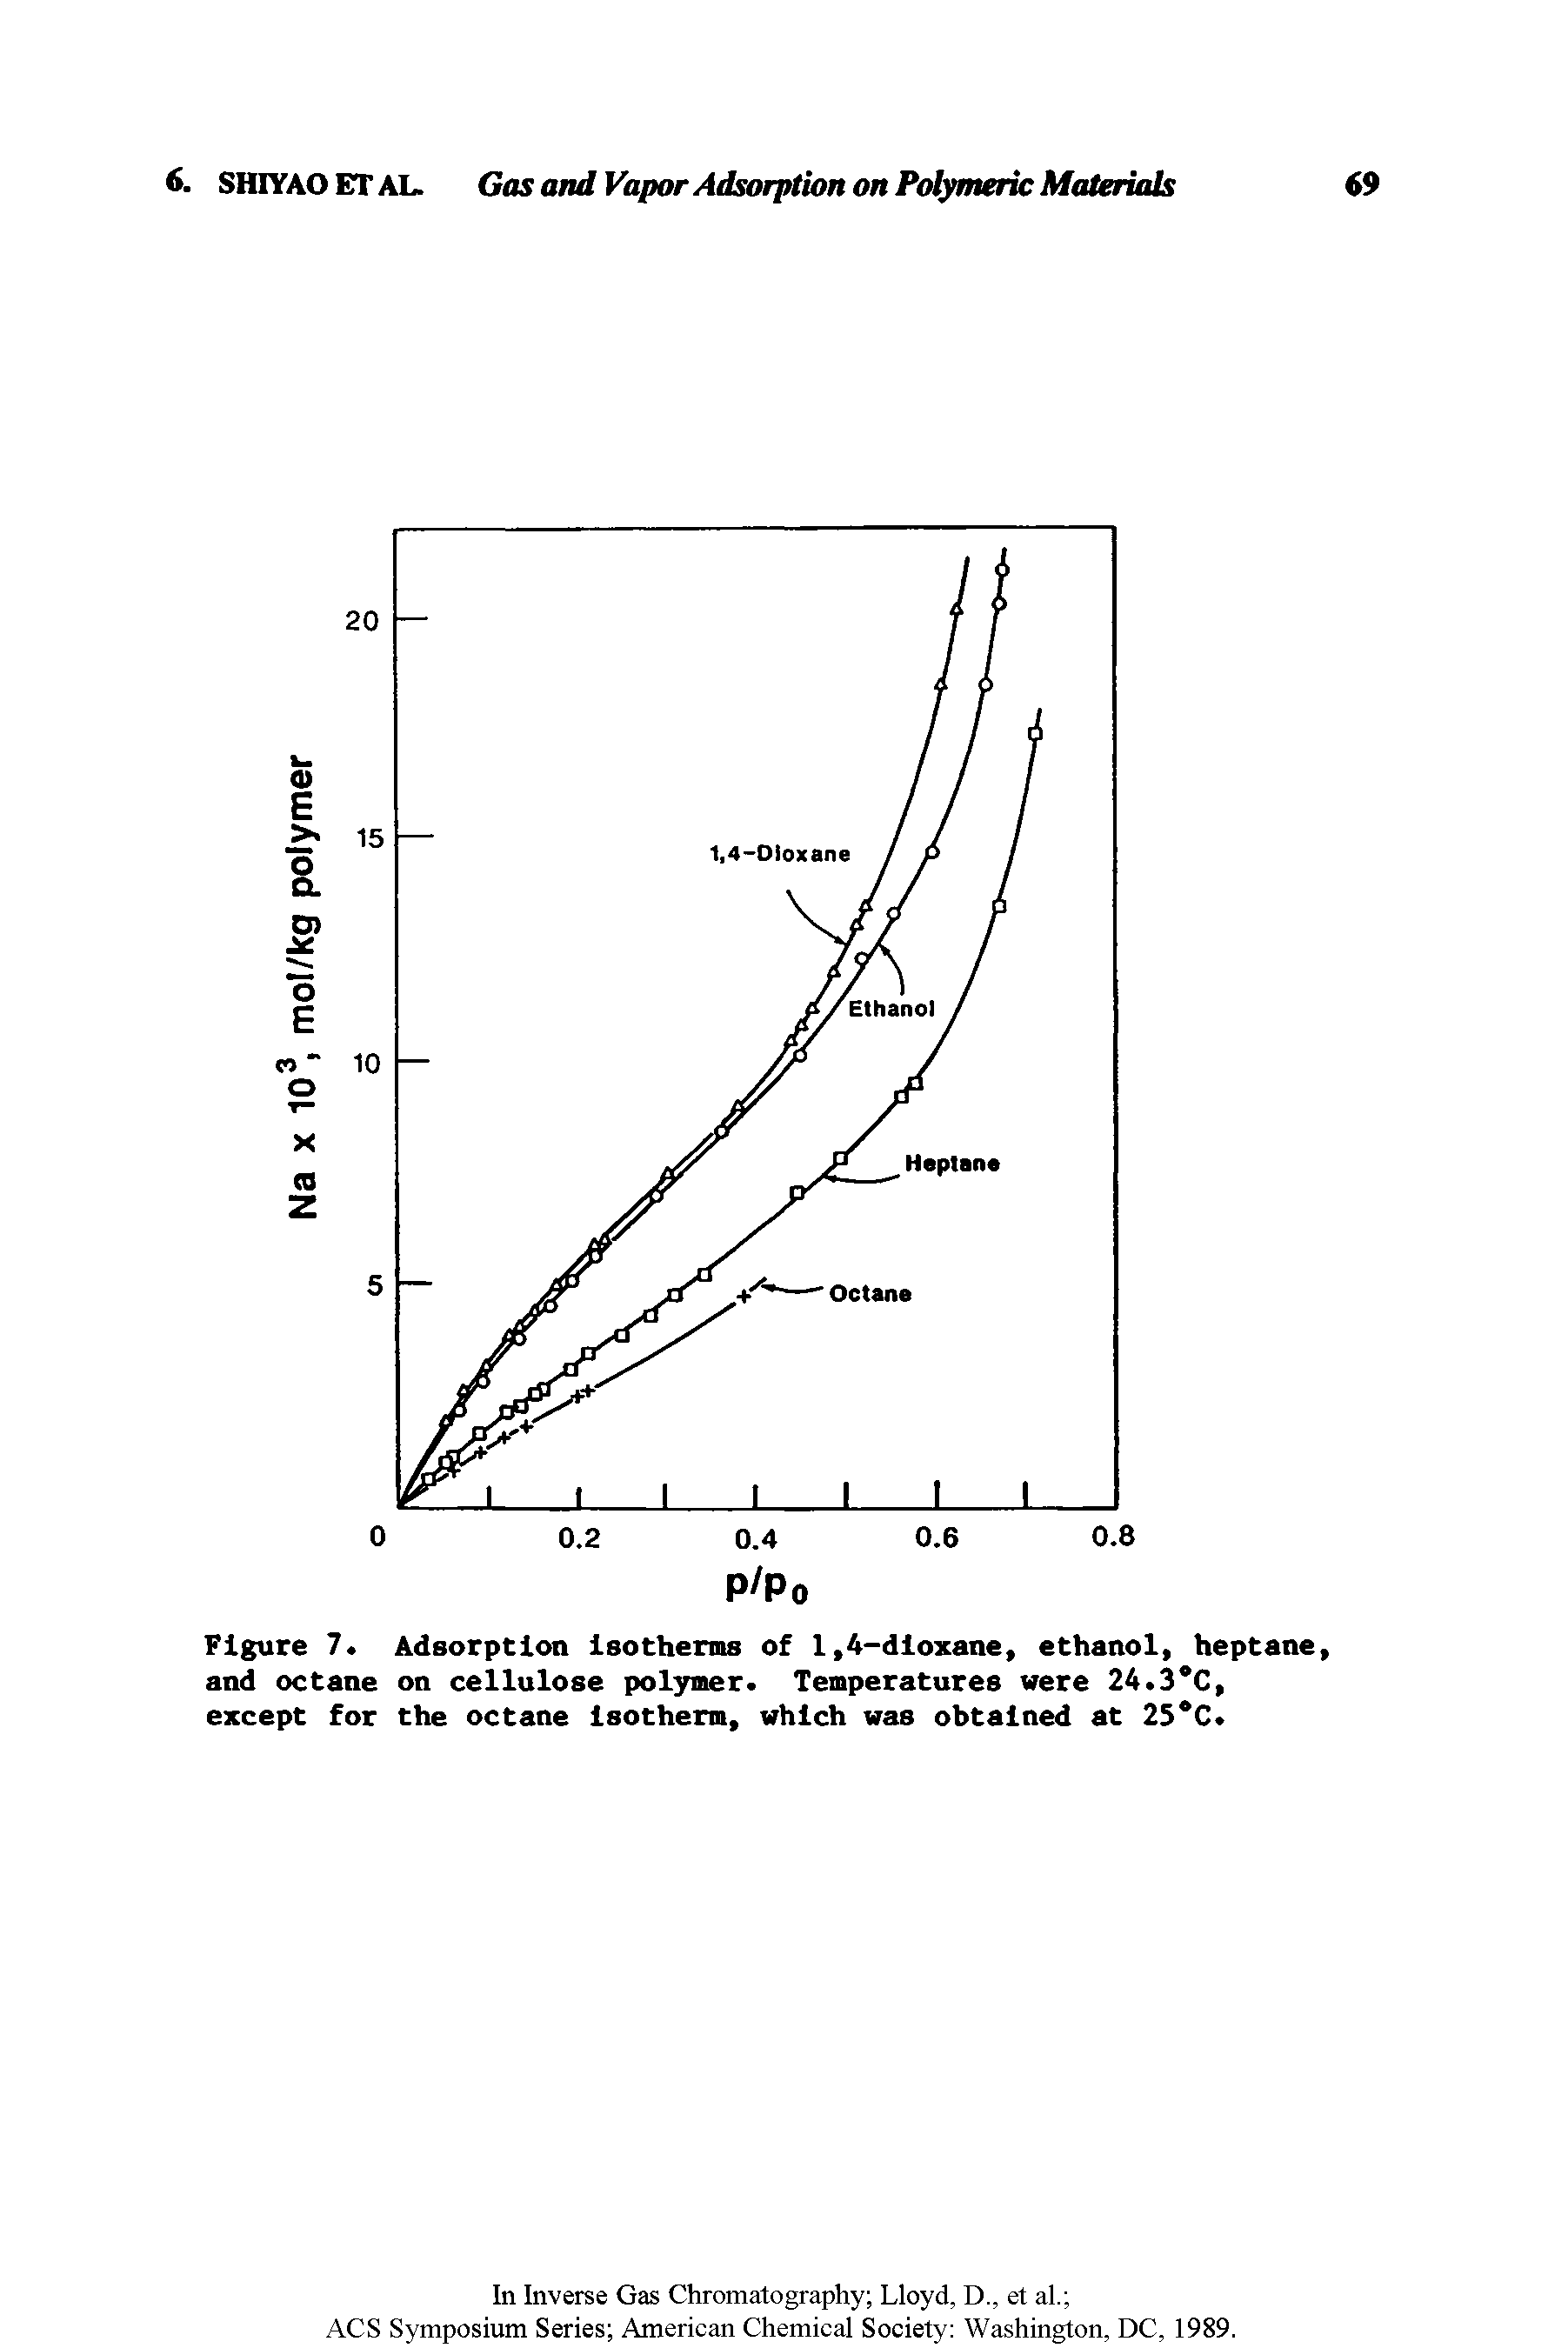 Figure 7. Adsorption isotherms of 1,4-dioxane, ethanol, heptane, and octane on cellulose polymer. Temperatures were 24.3 C, except for the octane isotherm, which was obtained at 25 C.